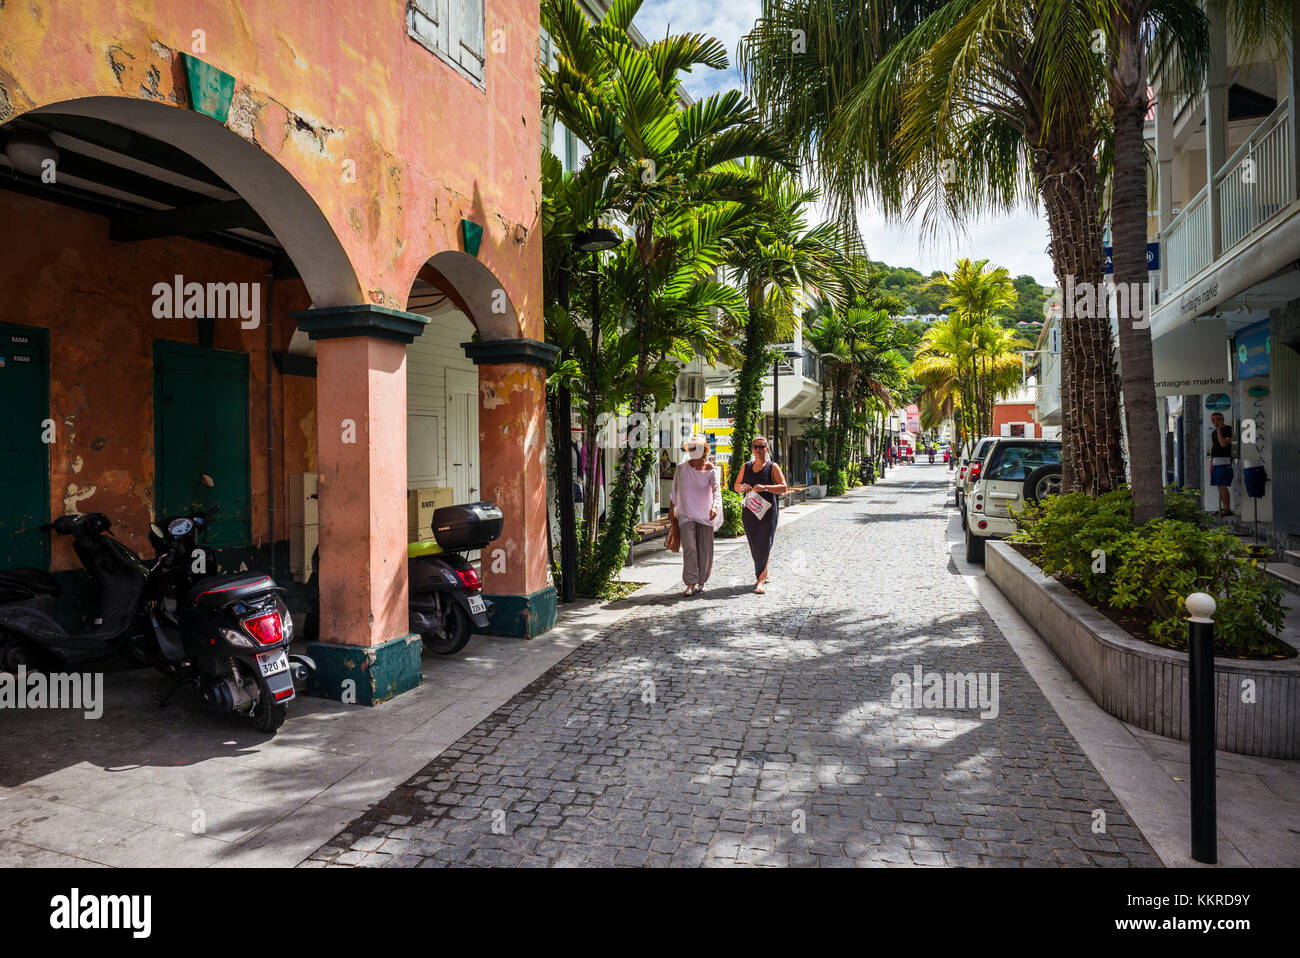 French West Indies, st-barthelemy, Gustavia, Shopping district Banque D'Images